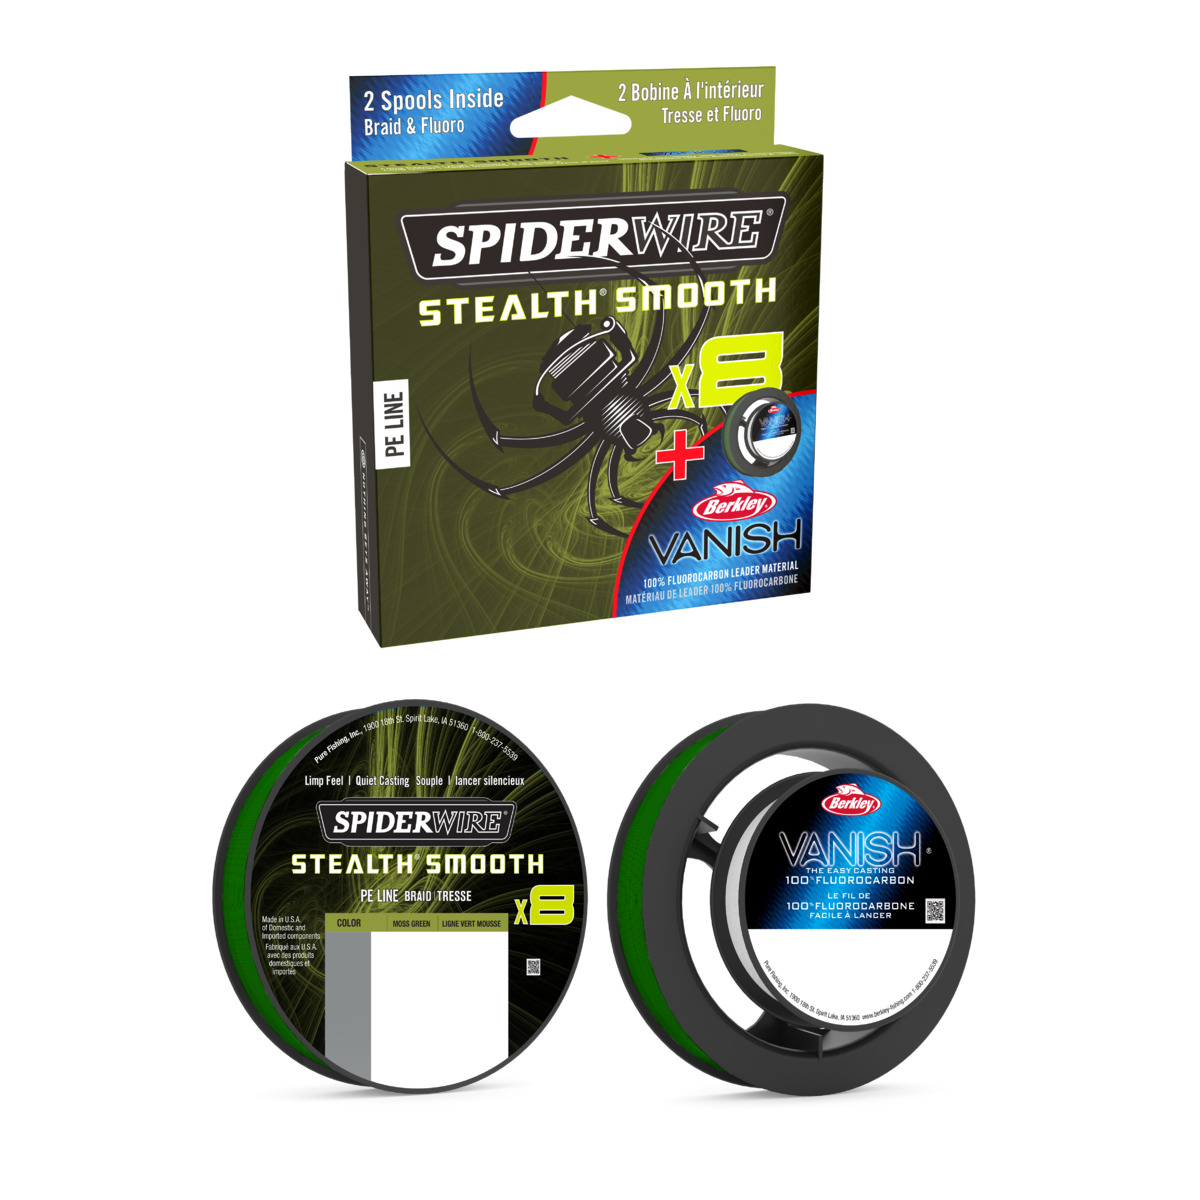 Spiderwire 8 Braid And Fluorocarbon Duo Spool System - 150 m msgrn/Vanish 50 m 0.11/0.32 mm